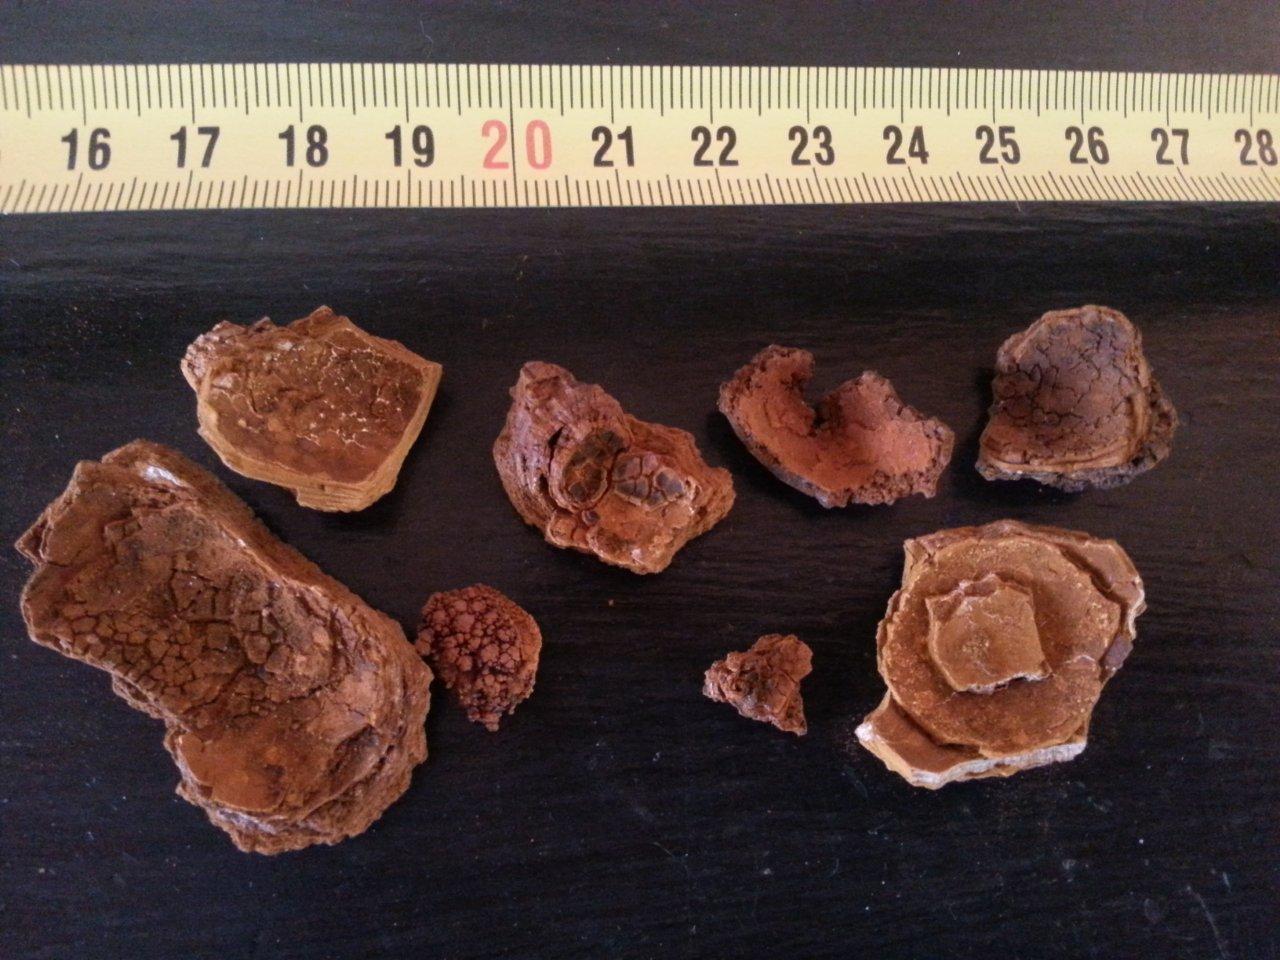 Gallstones with various shapes